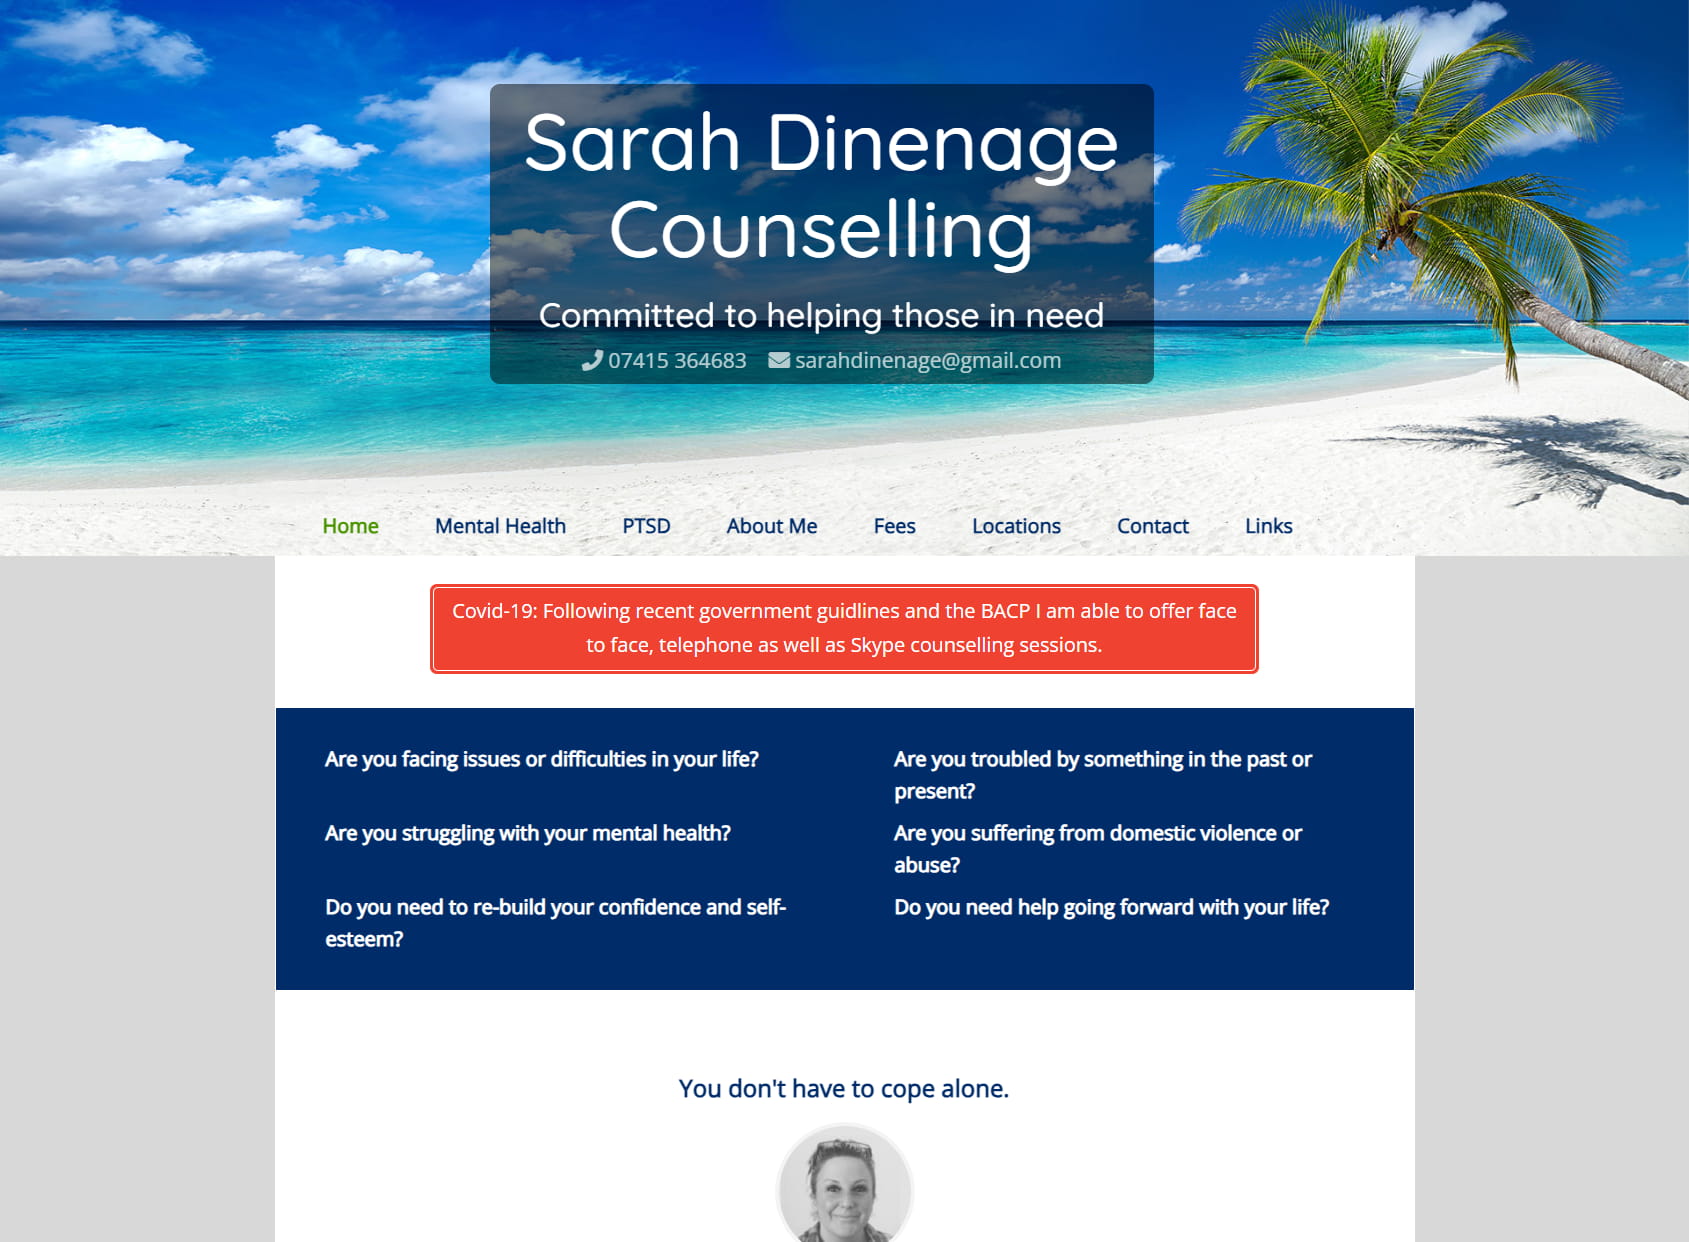 Sarah Dinenage Counselling